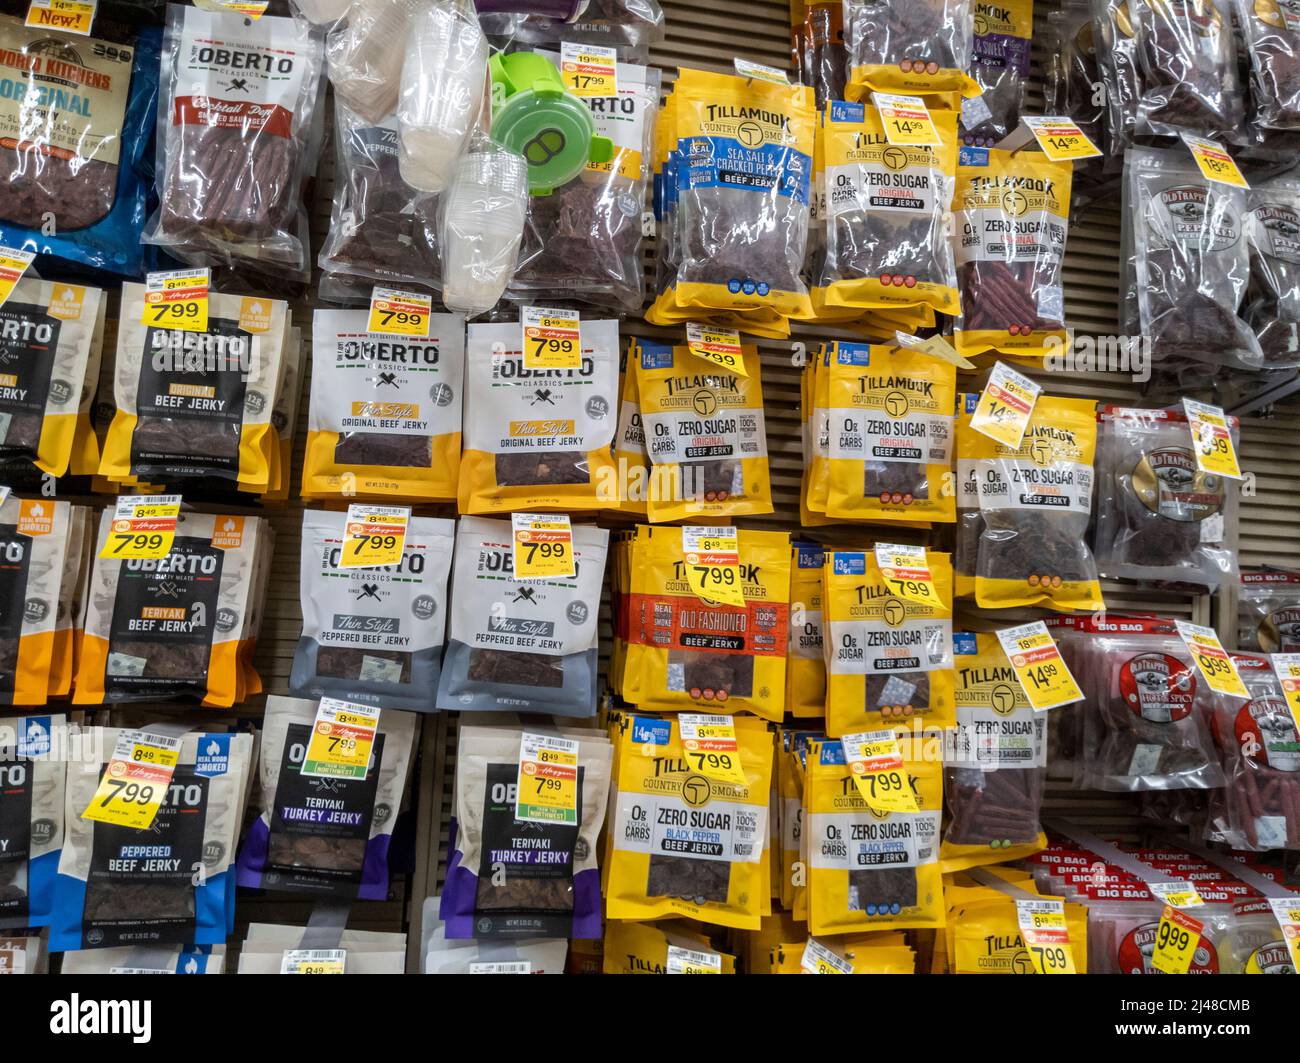 Woodinville, WA USA - circa April 2022: Angled view of a large variety of beef jerky and sausage links for sale inside a Haggen grocery store. Stock Photo